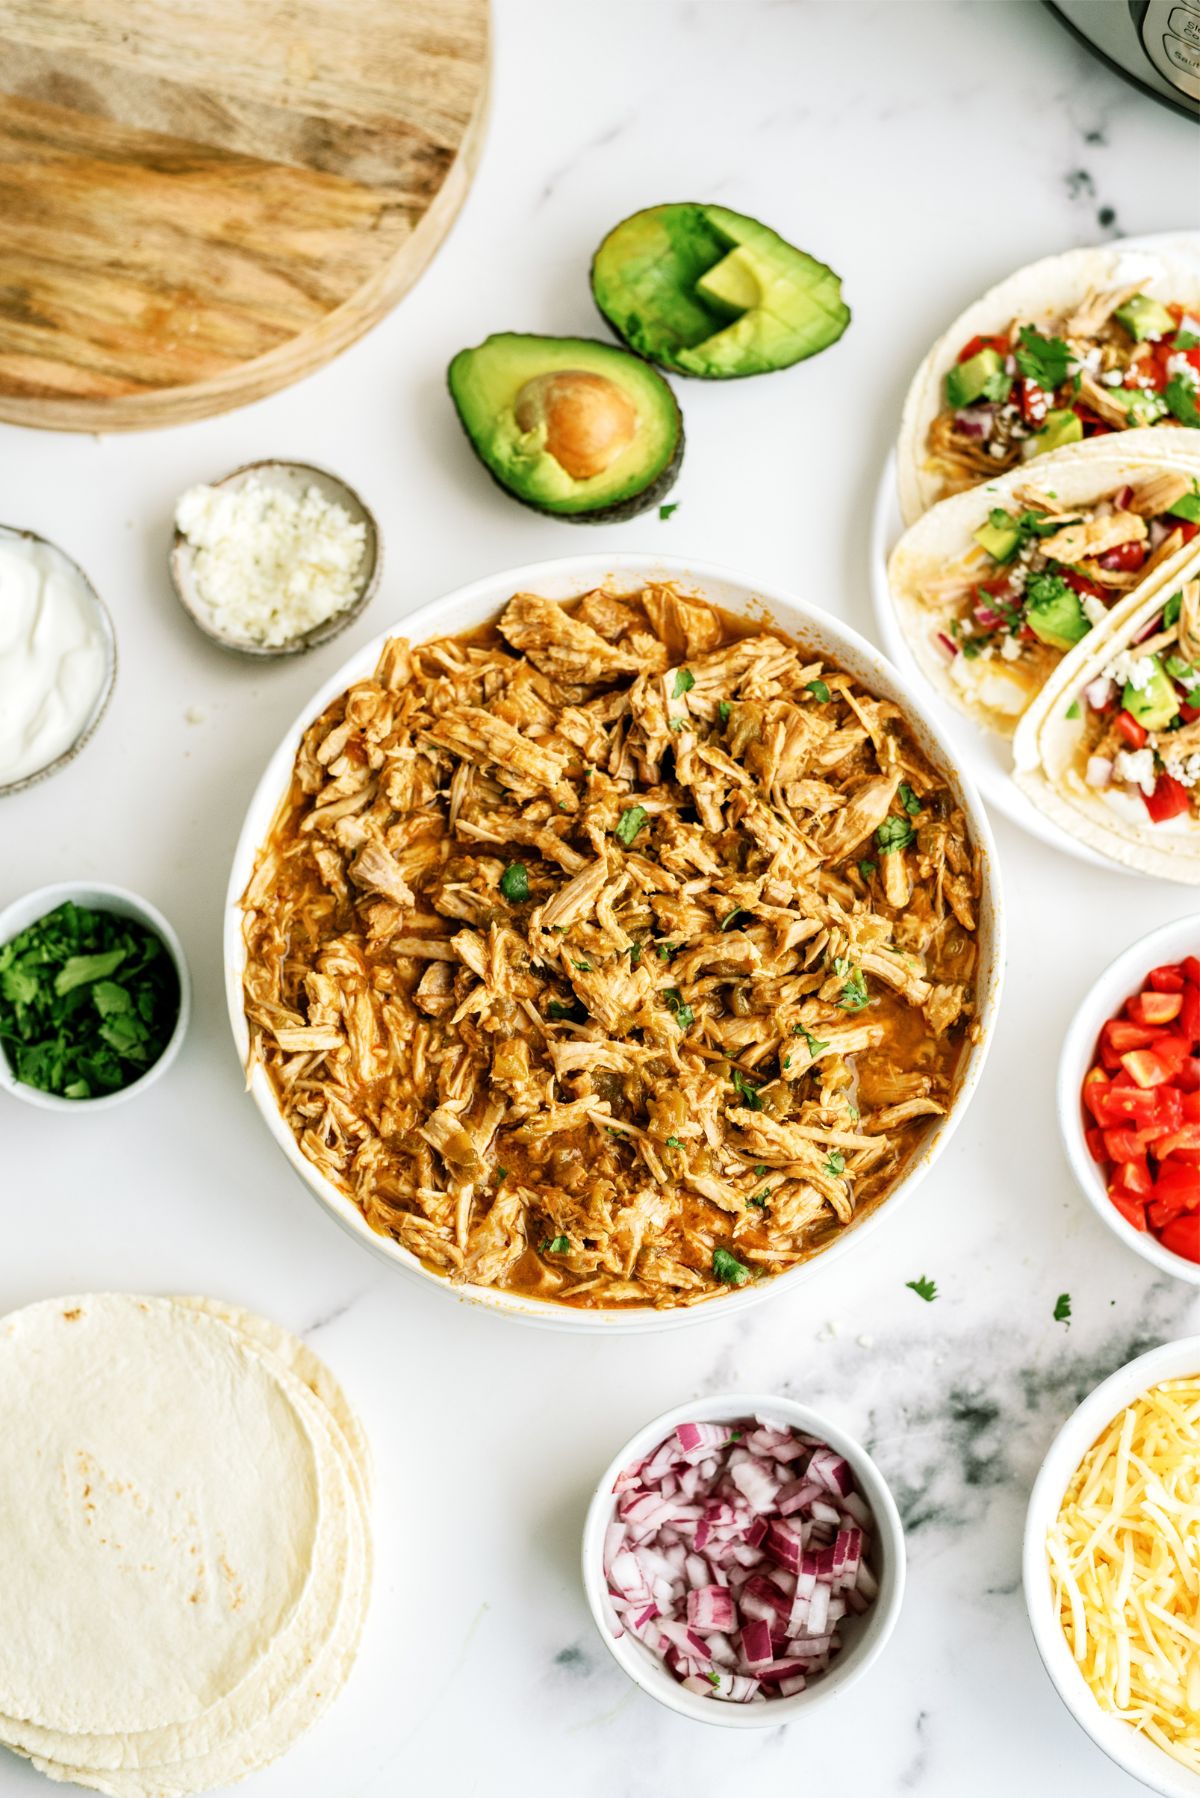 Ingredients needed for Instant Pot Green Chile Pork Tacos